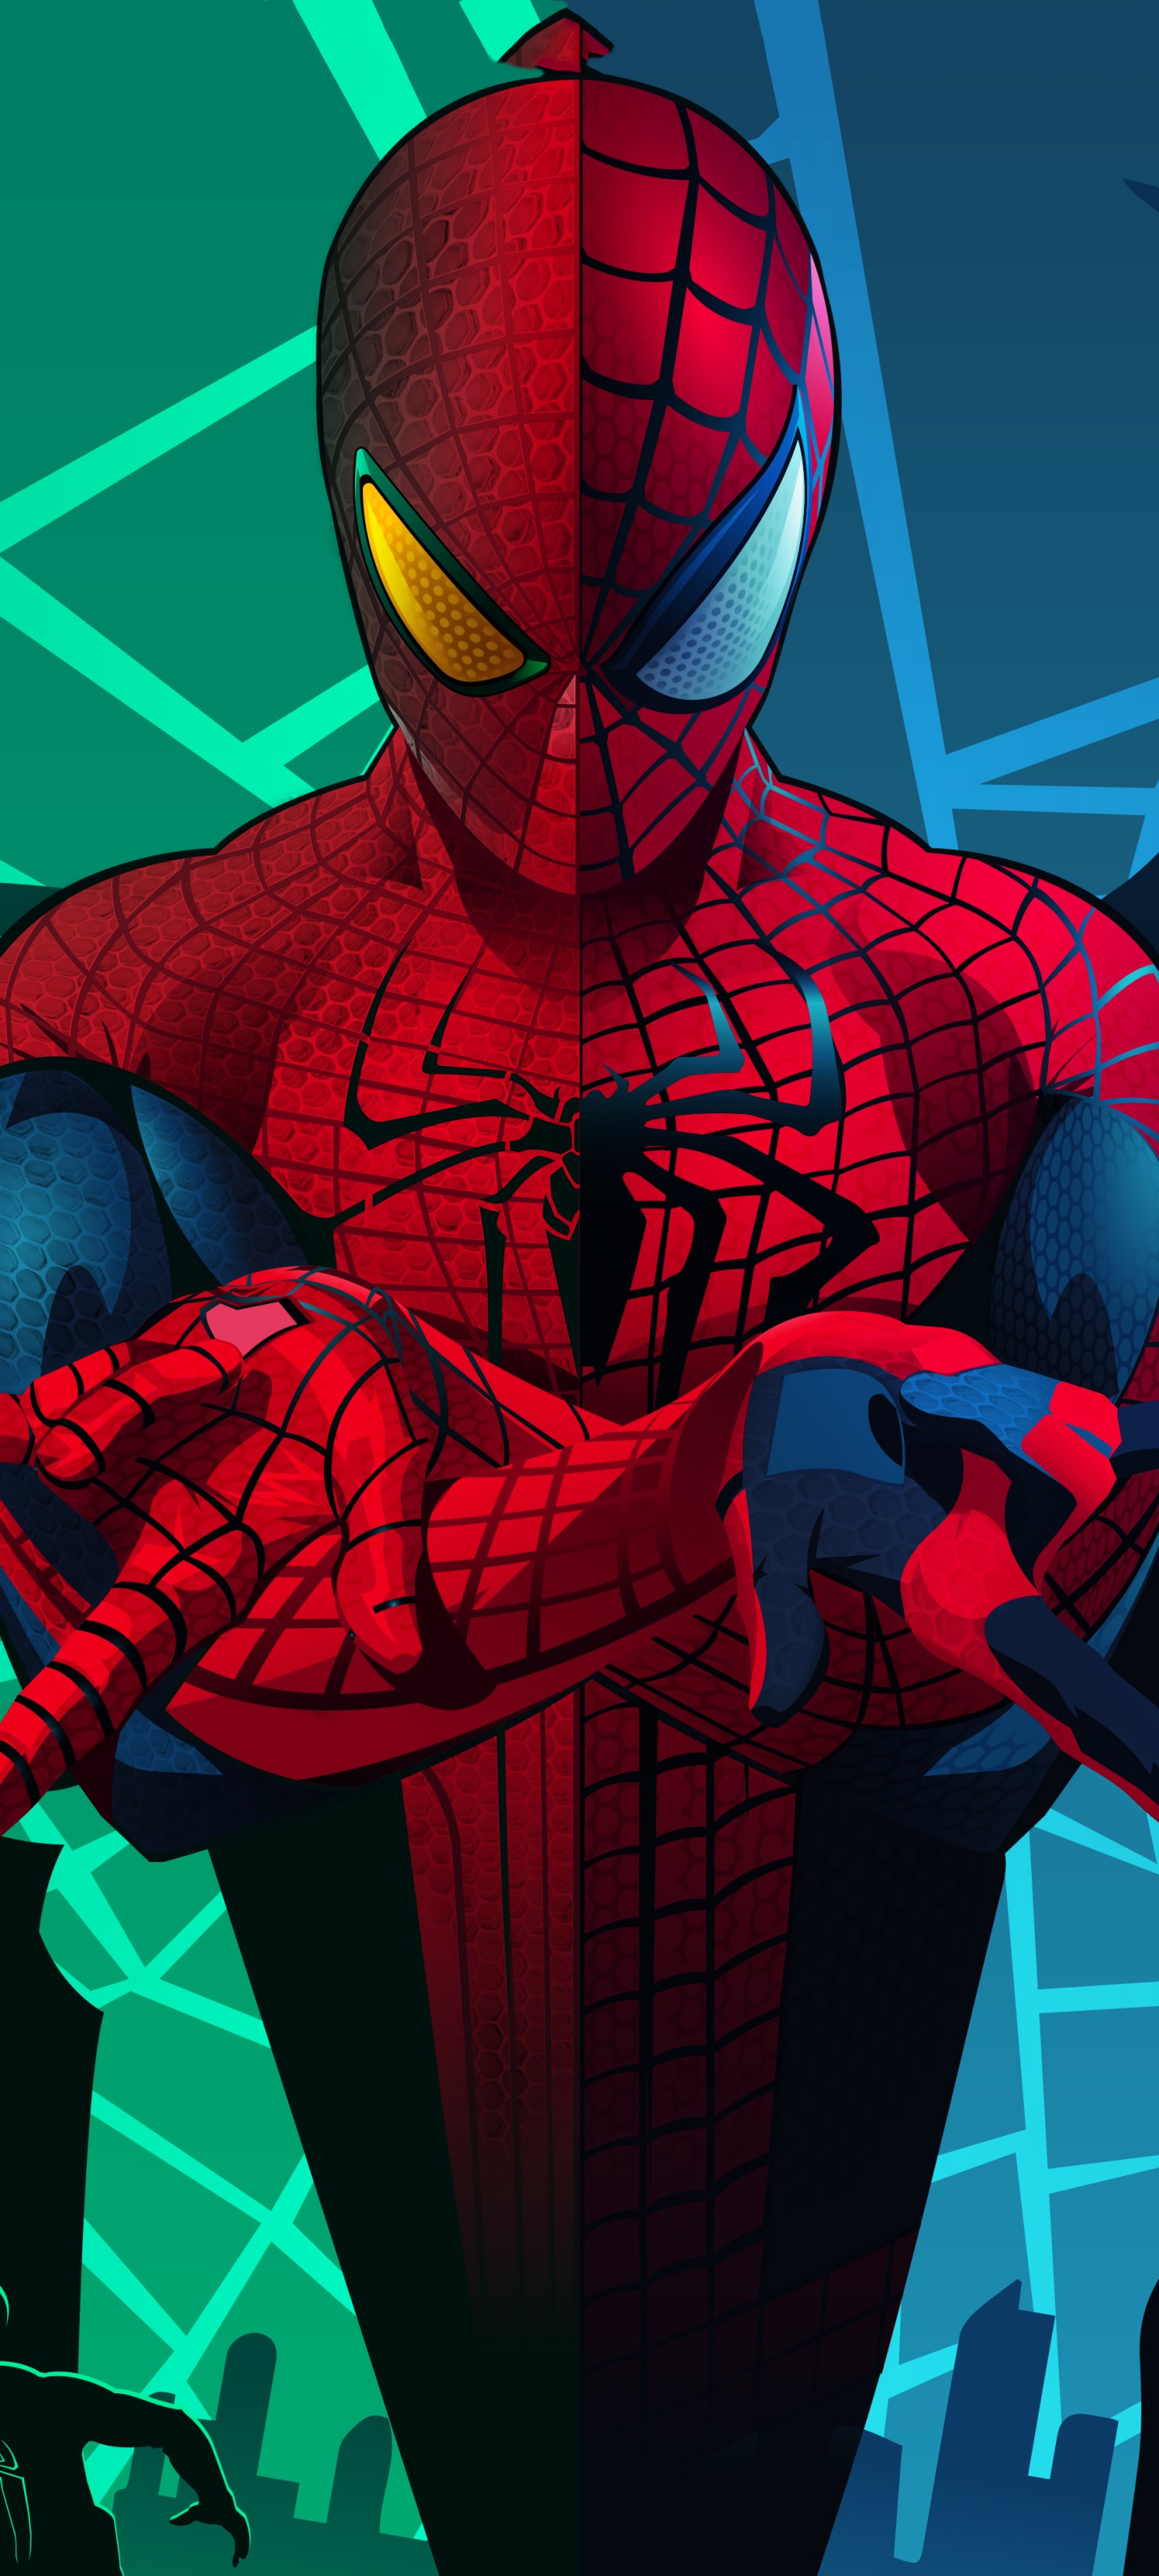 Wallpaper / Movie The Amazing Spider Man Phone Wallpaper, The Amazing Spider Man Spider Man, Peter Parker, 1440x3200 Free Download